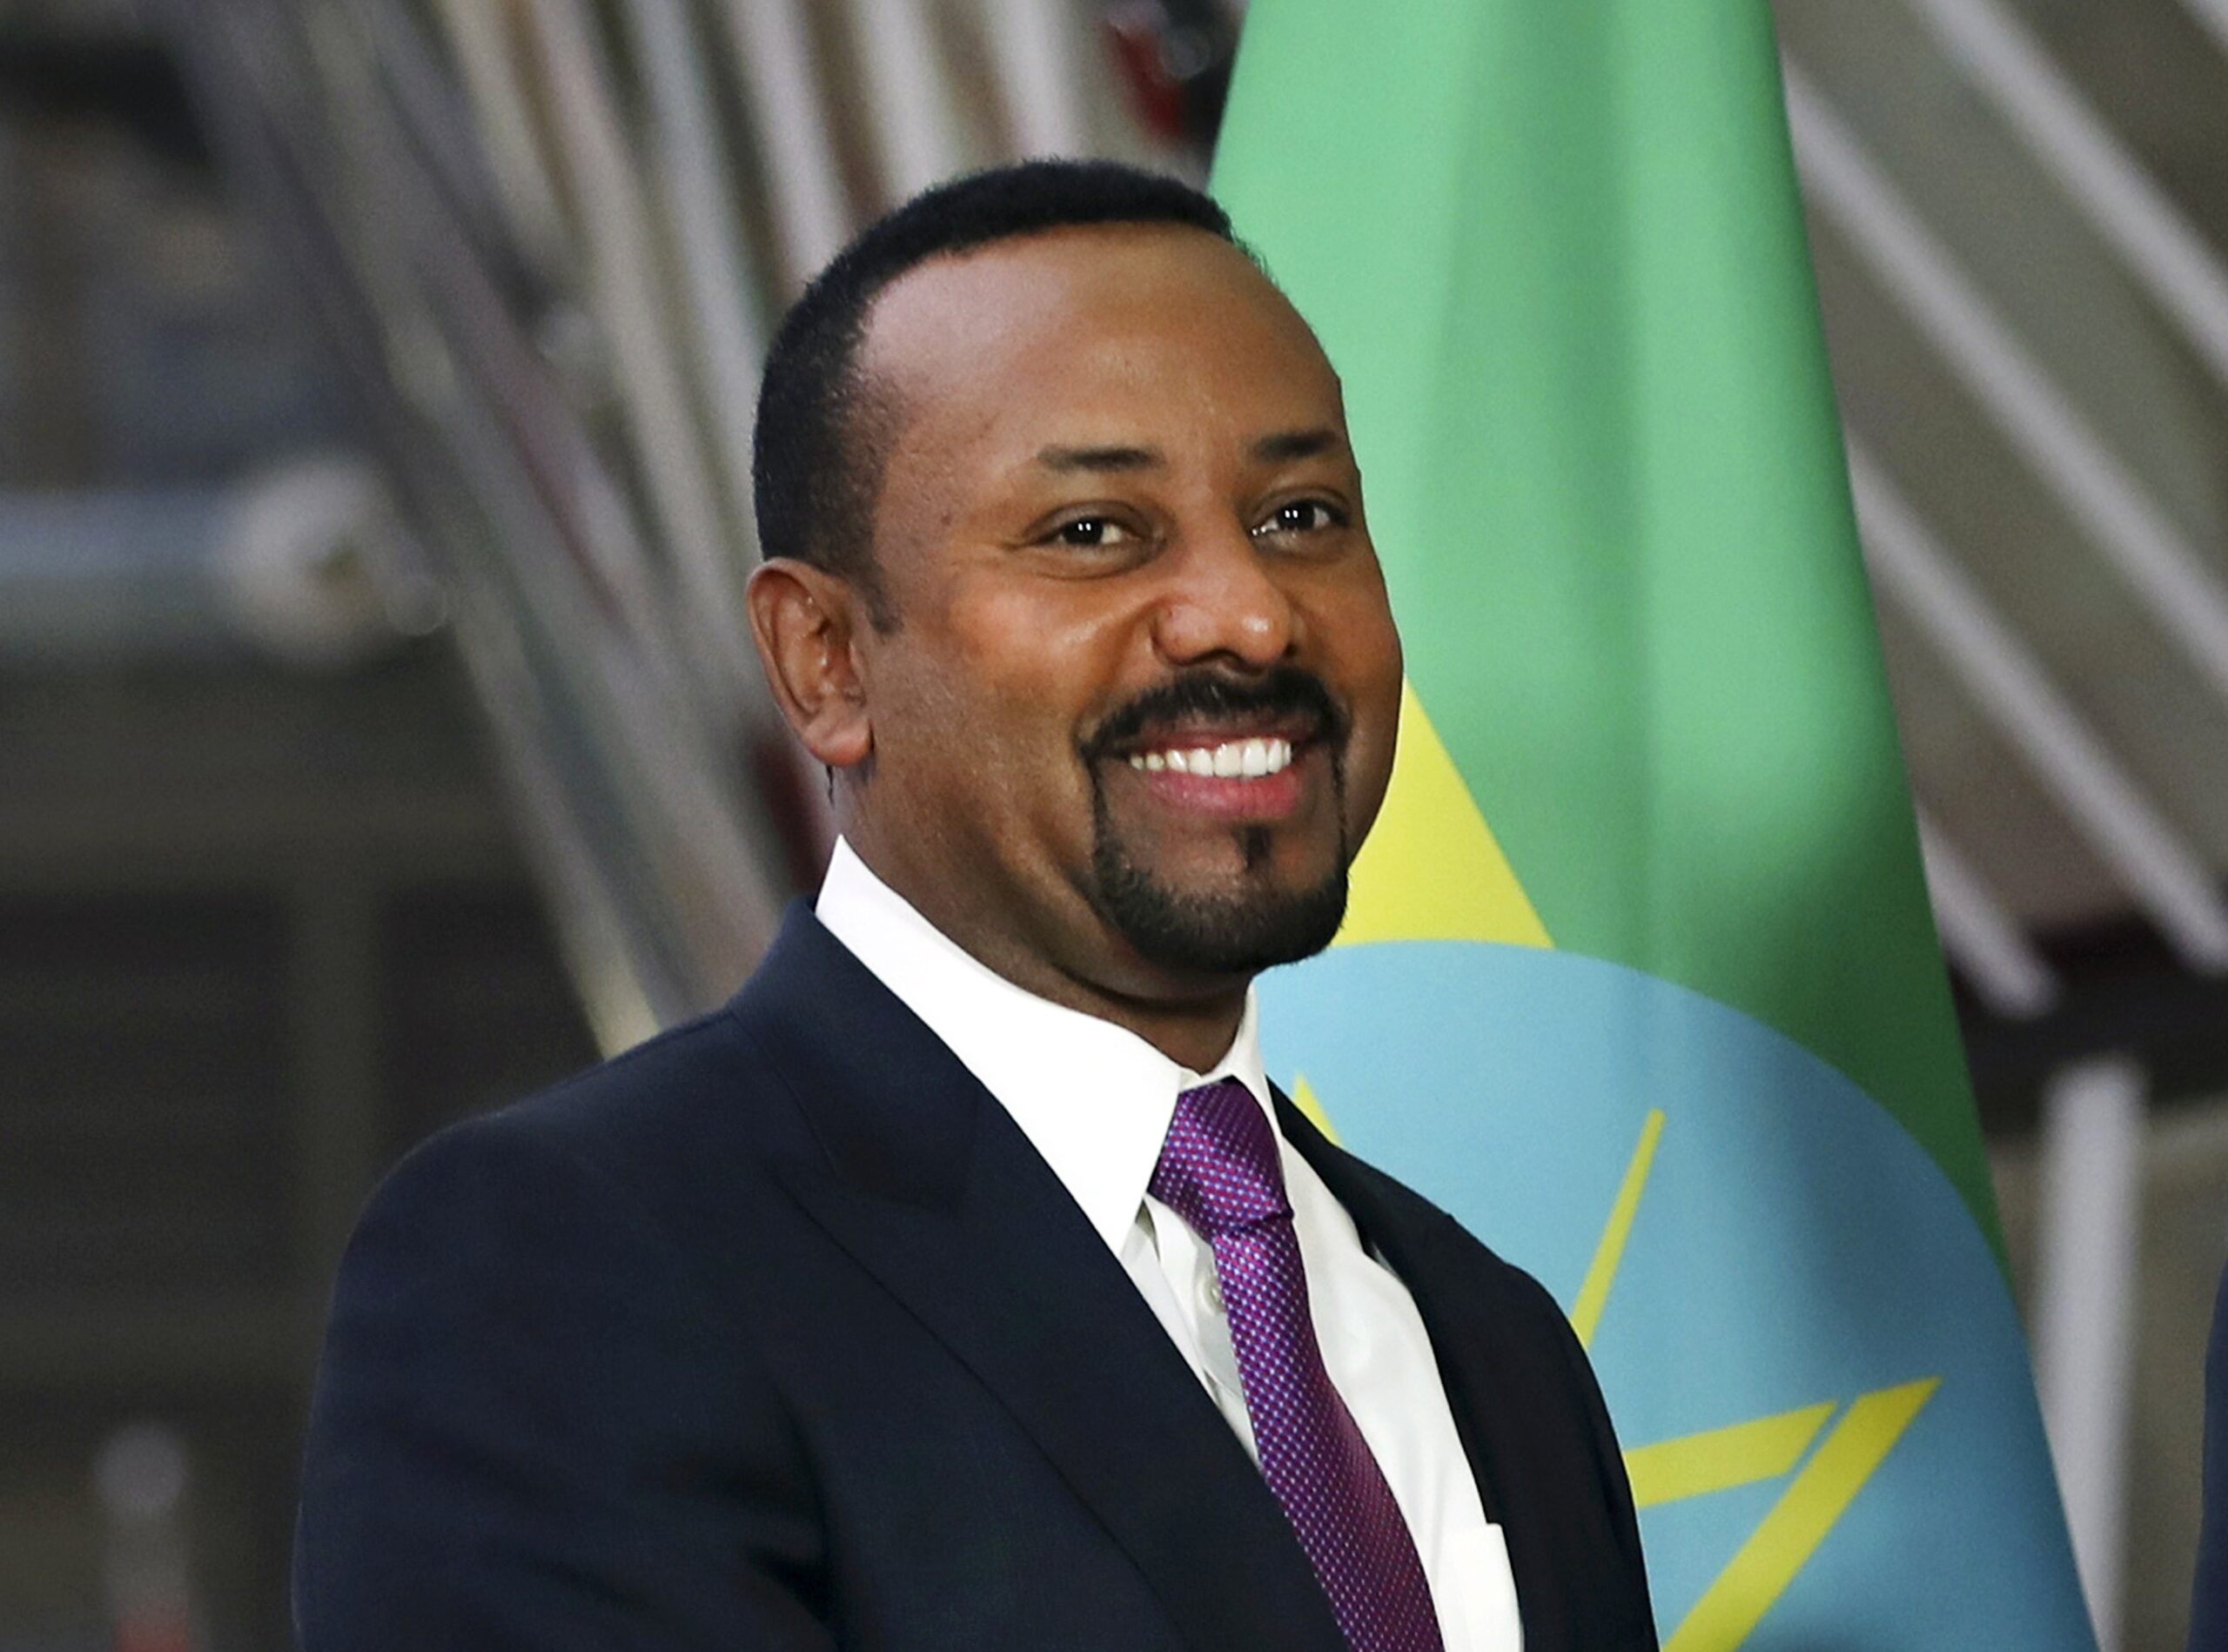 Ethiopia plans legislation allowing foreigners to own real estate